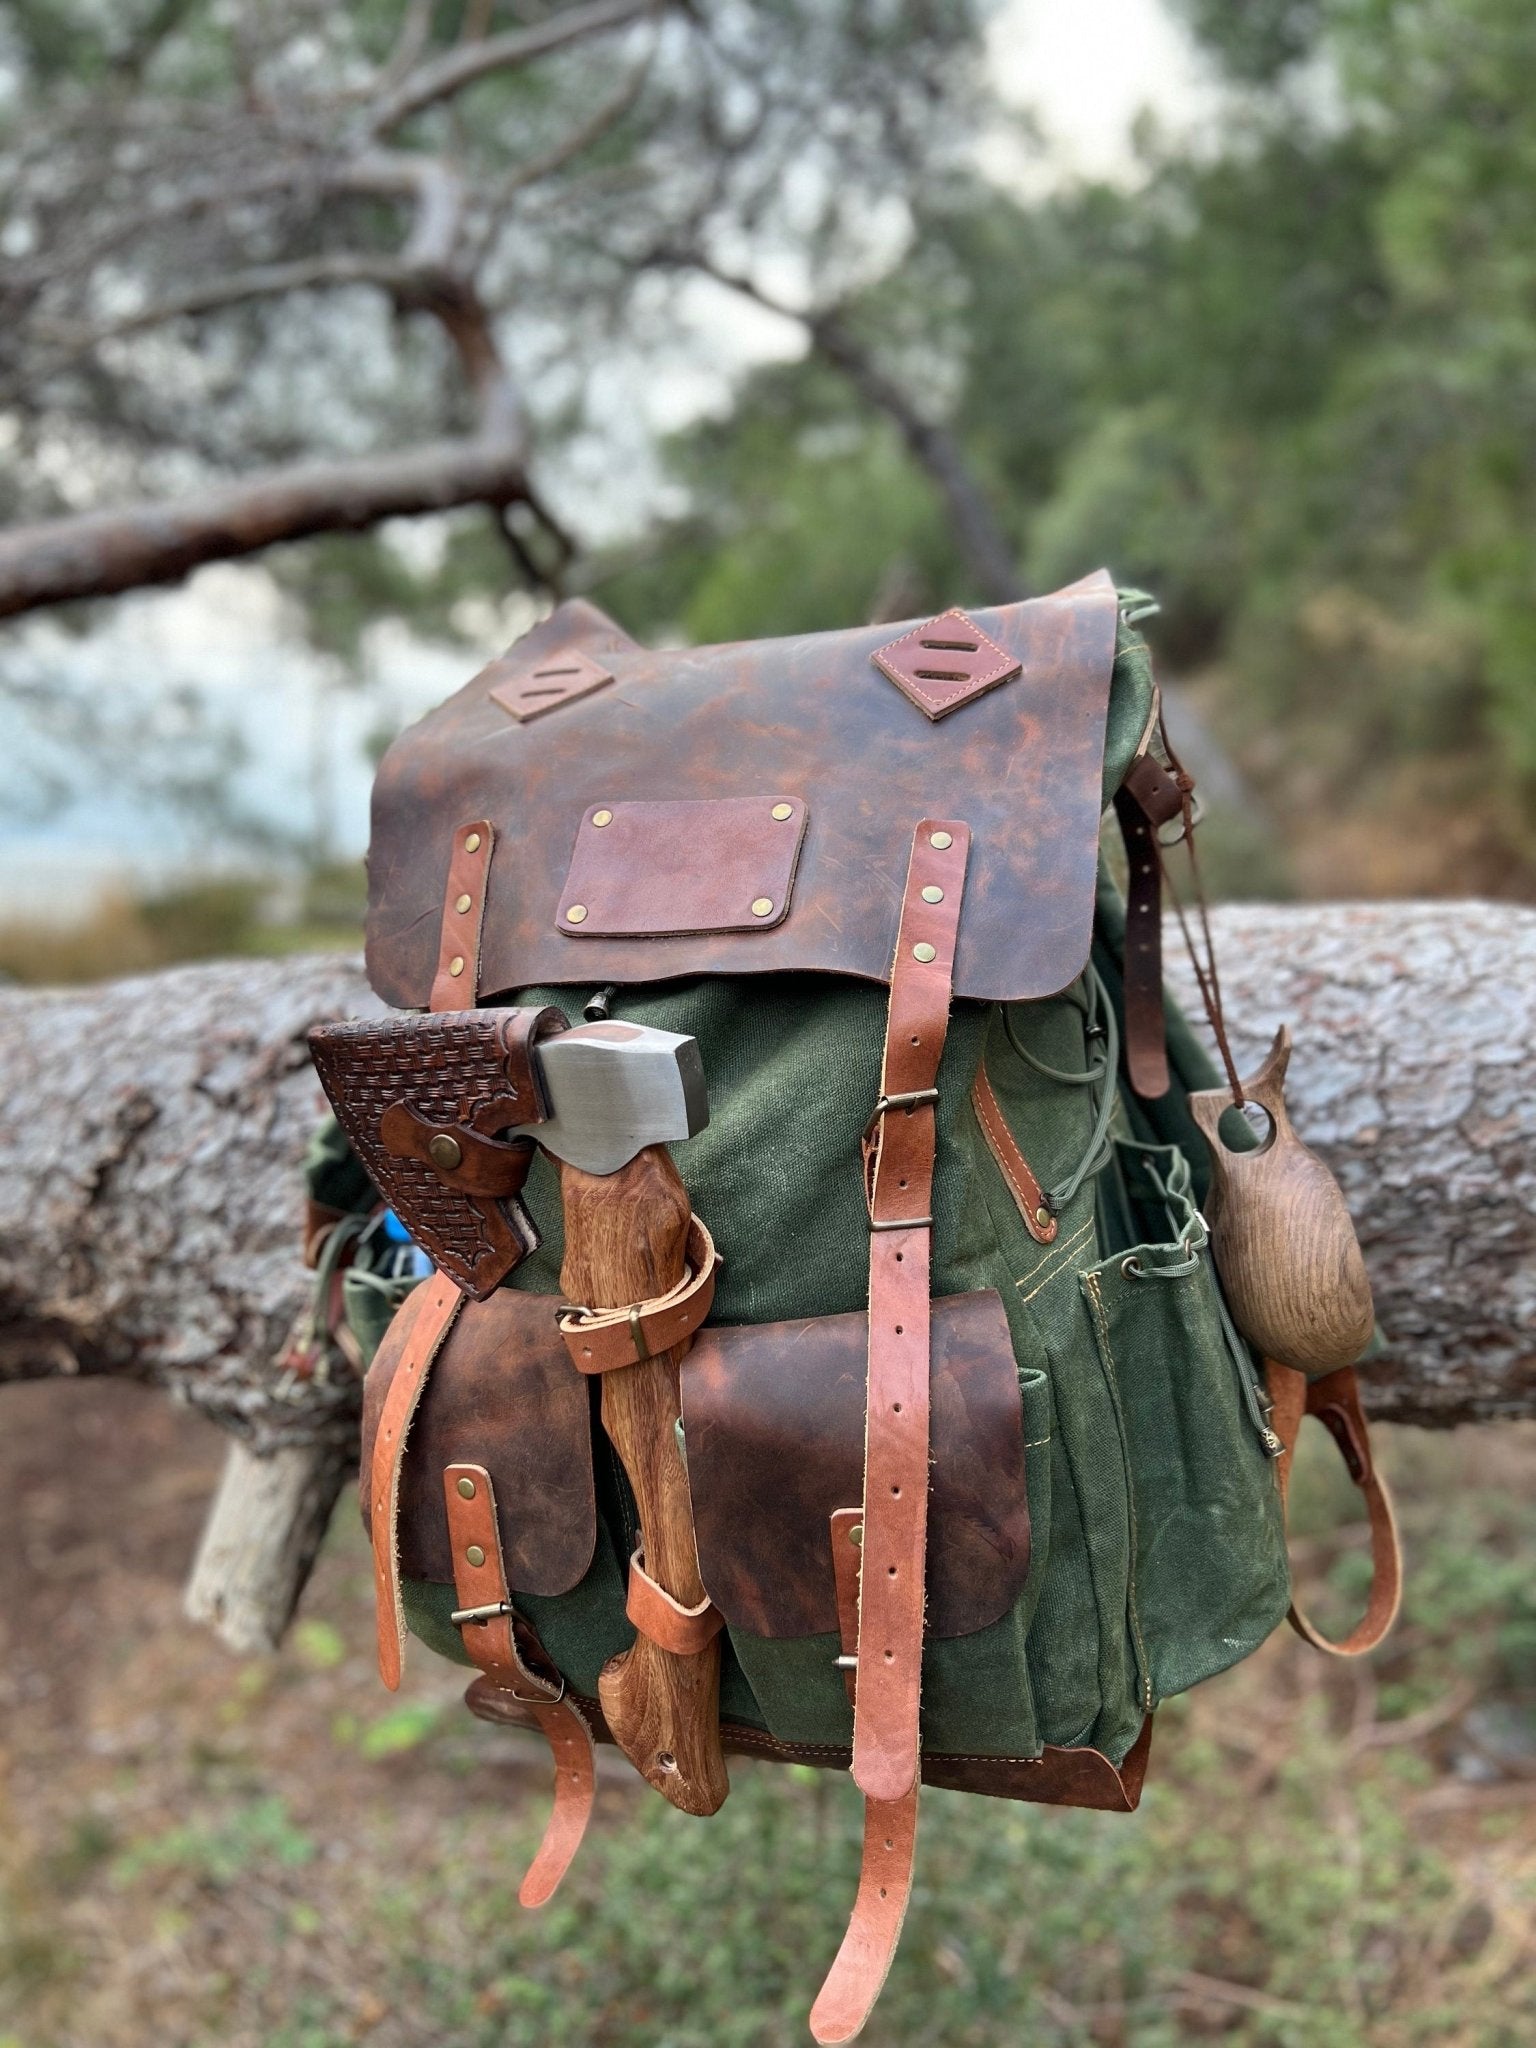 Hiking, Bushcraft, Camping Backpack. Leather-Waxed Canvas